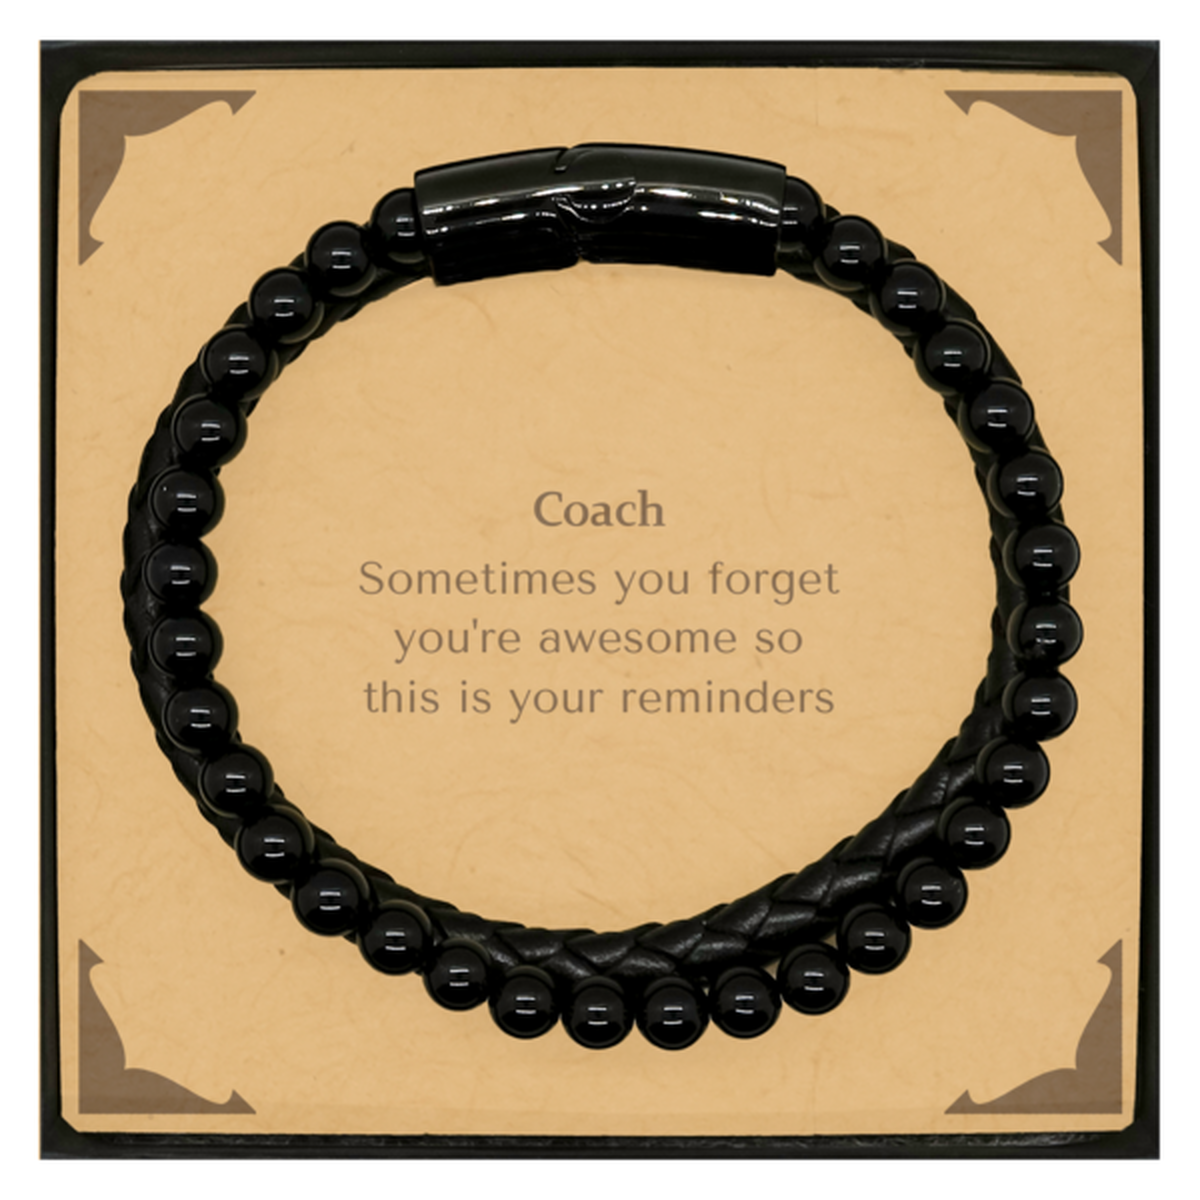 Sentimental Coach Stone Leather Bracelets, Coach Sometimes you forget you're awesome so this is your reminders, Graduation Christmas Birthday Gifts for Coach, Men, Women, Coworkers